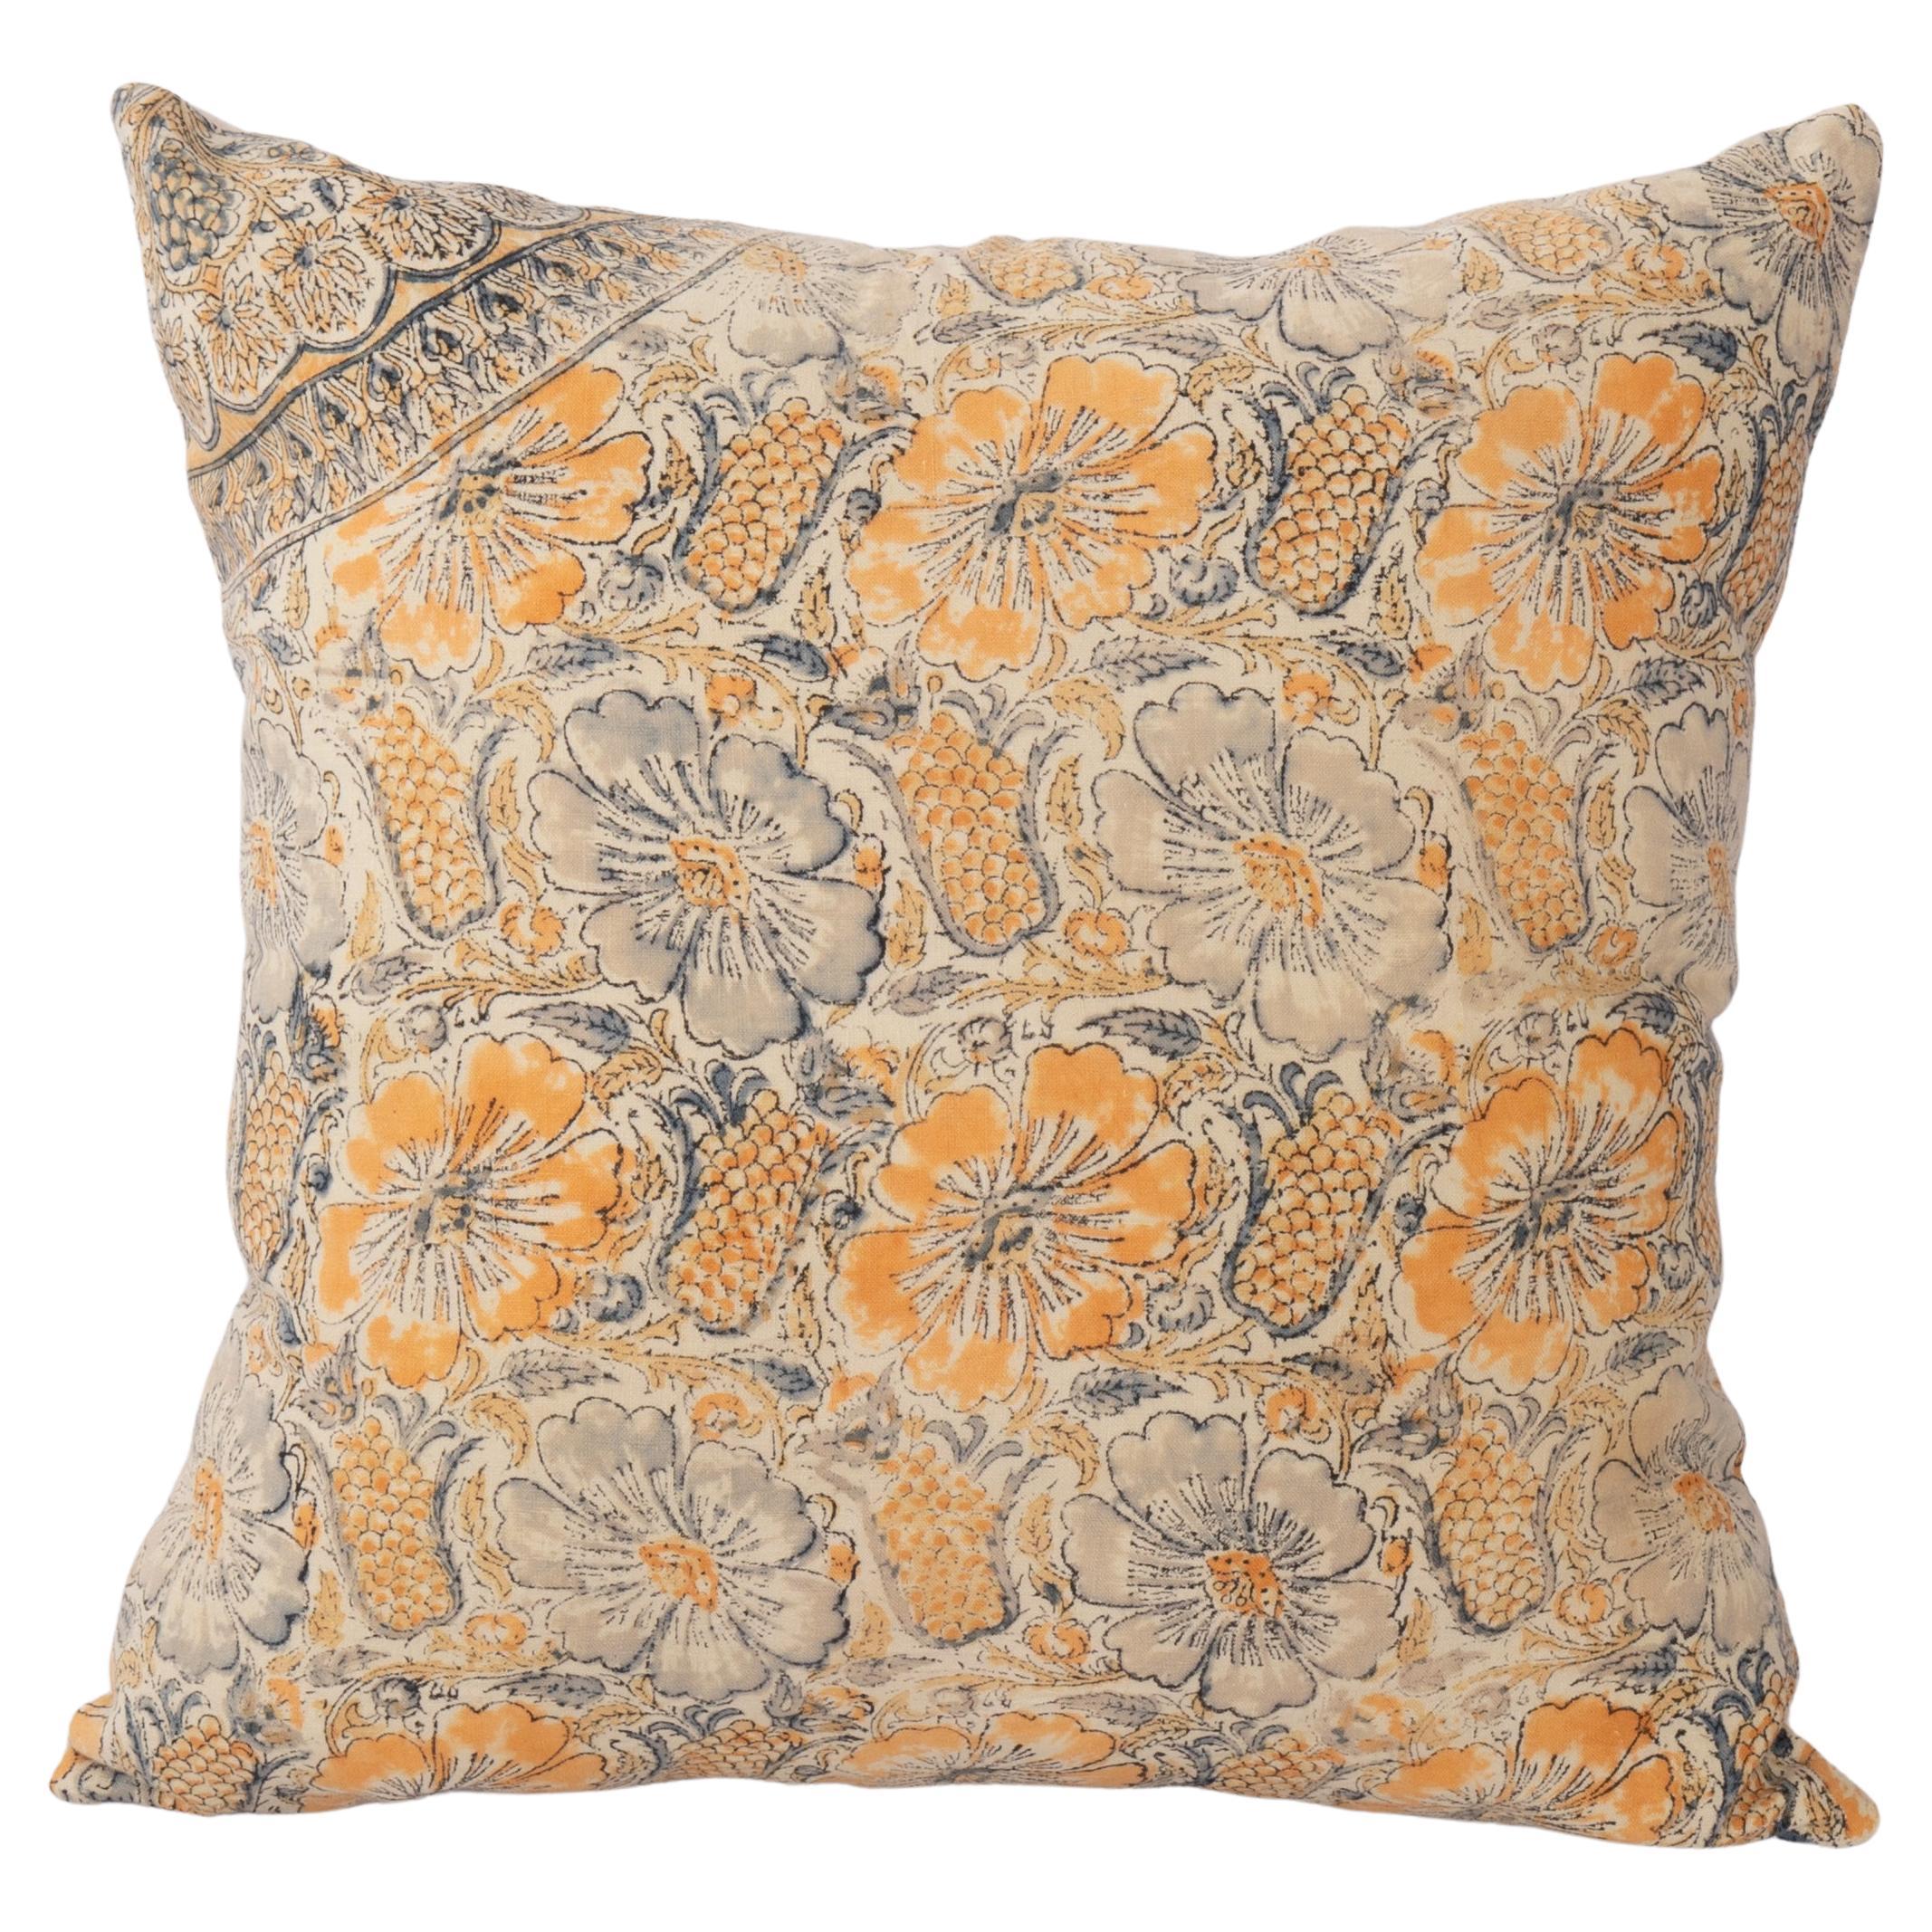 Pillow Cover Made from a Vintage Indian Block Printed Textile For Sale